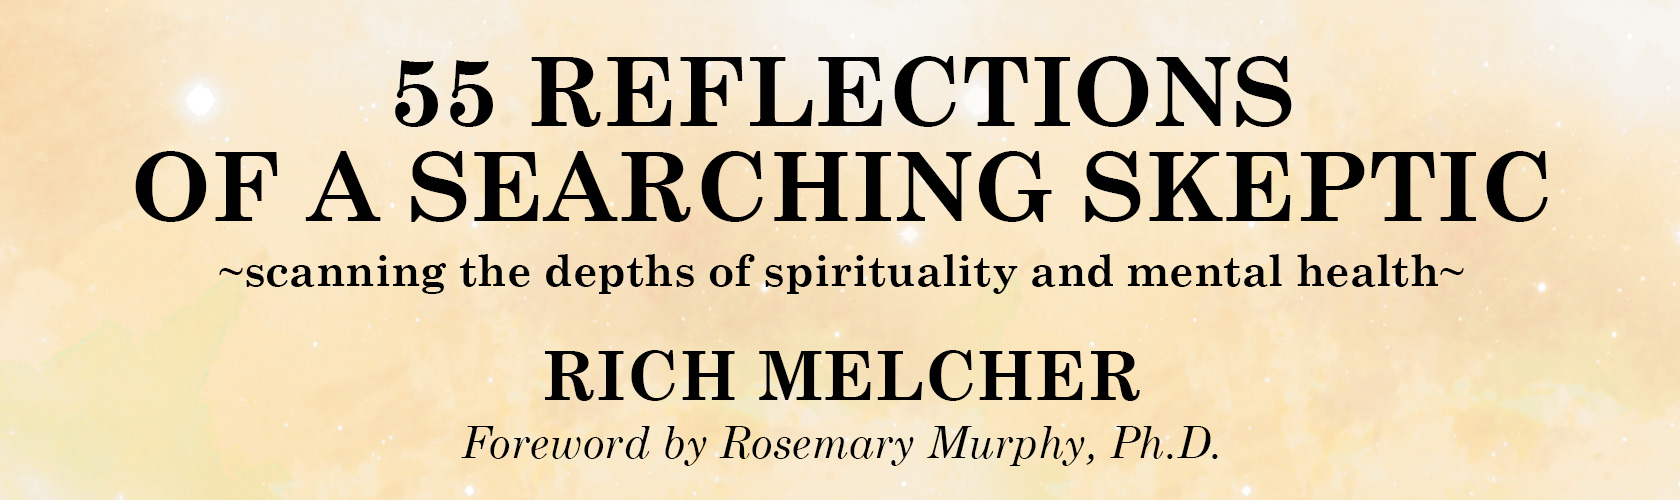 55 Reflections  of a Searching SKEPTIC